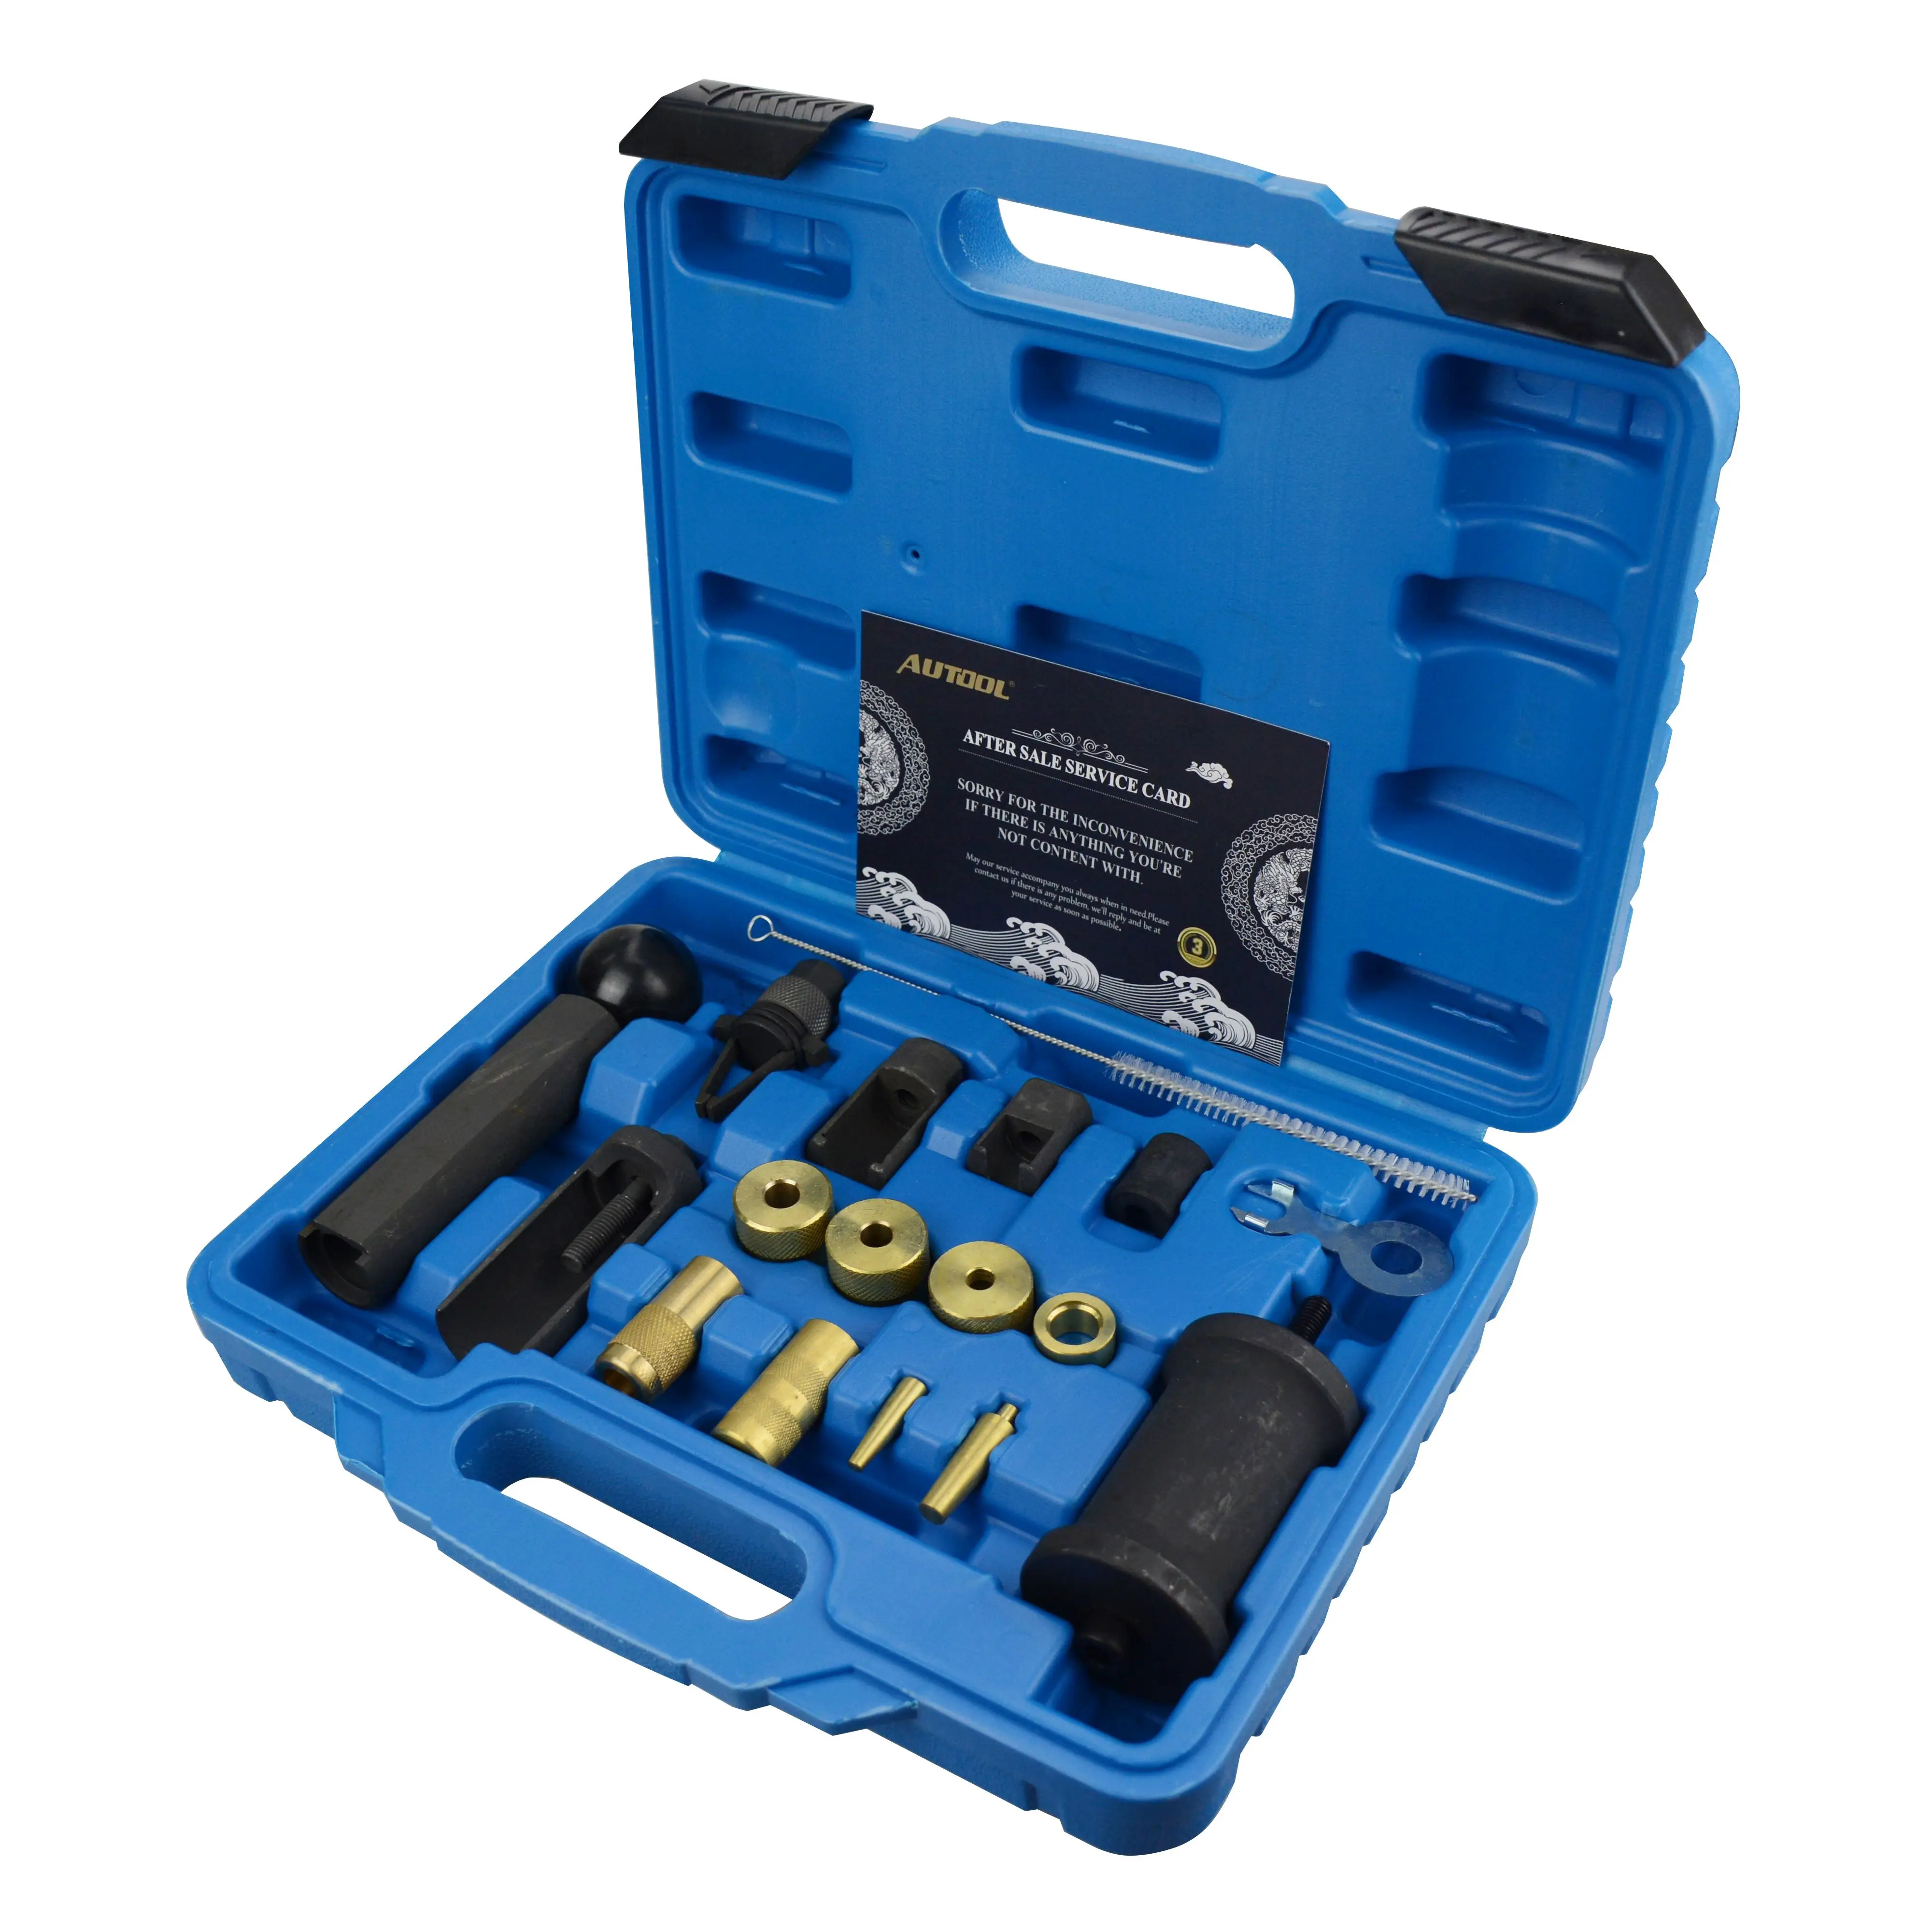 Valve Disassembly Installation Tools Sets Fuel Injector Dismounting Repair Tool 